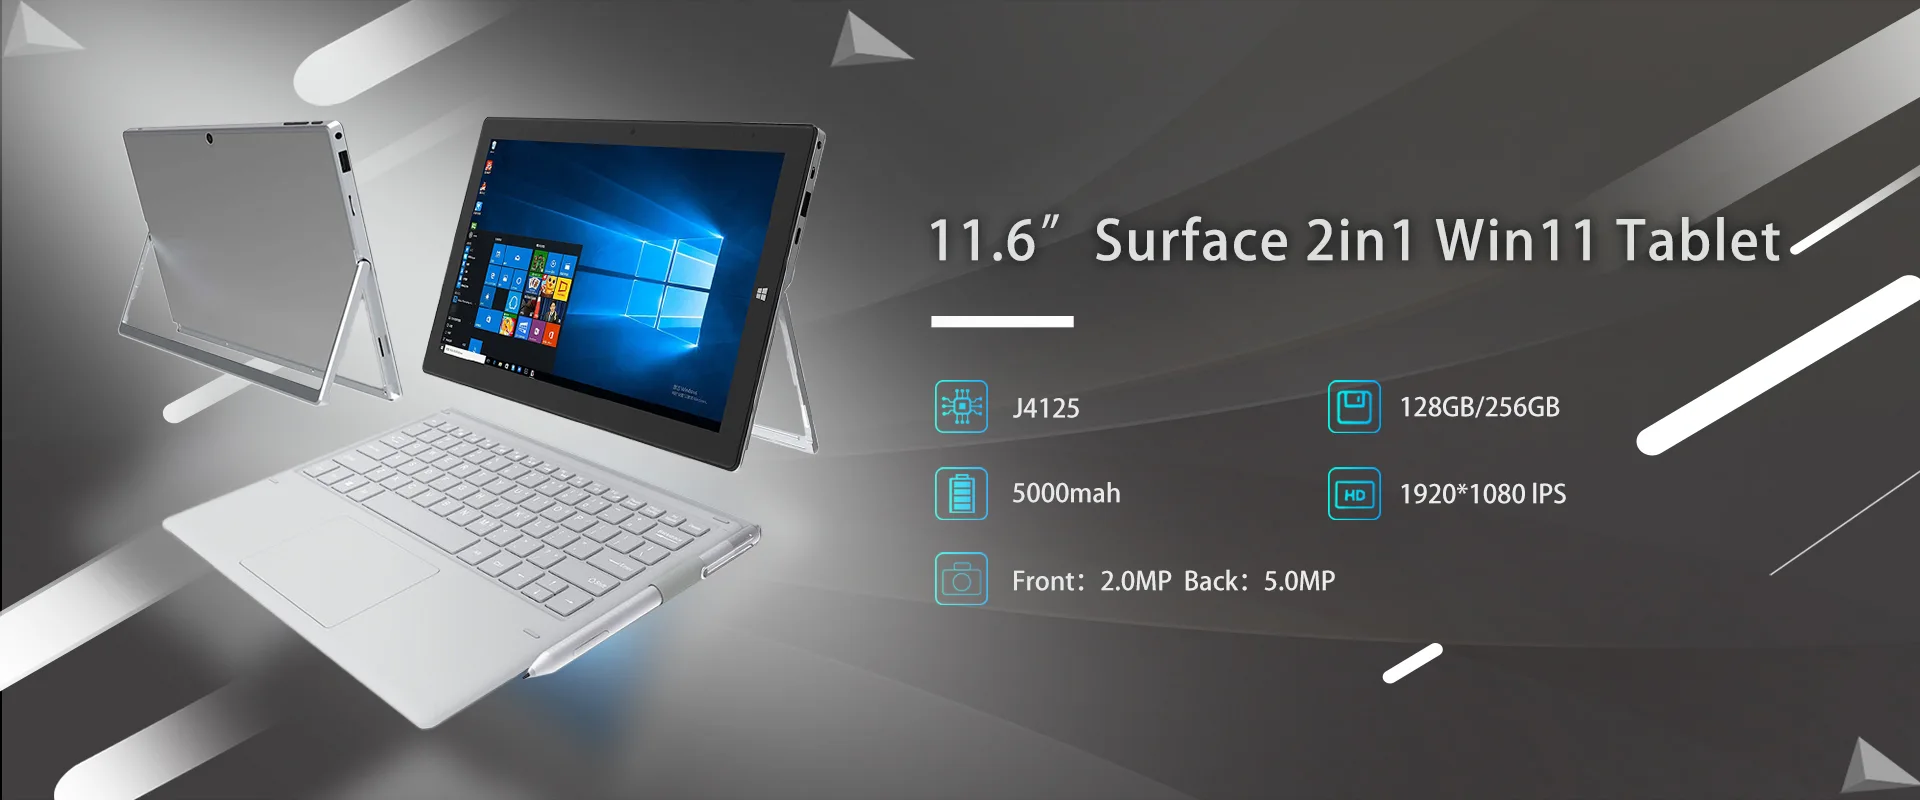 11.6'' Surface 2in1 Win11 Tablet